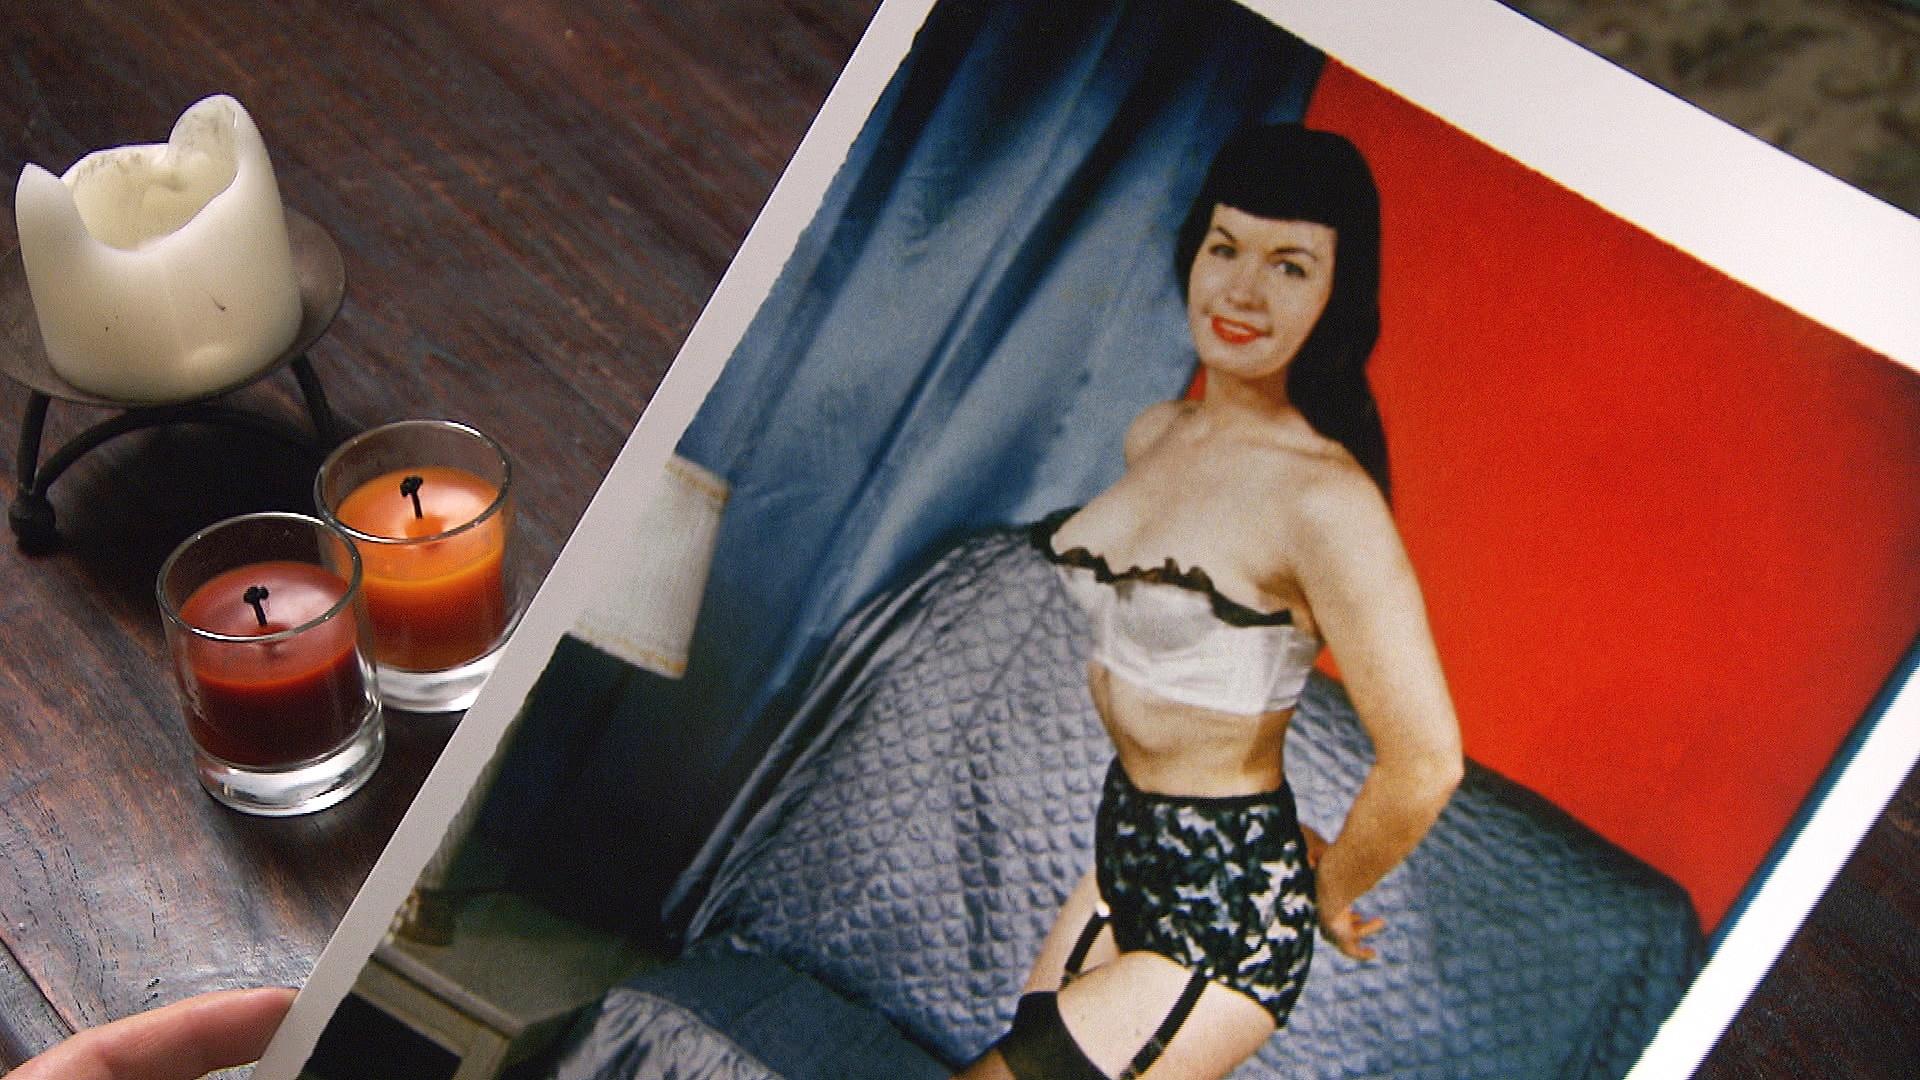 Details about   4 X 5 ORIGINAL PIN UP PHOTO FROM IRVING KLAW ARCHIVES OF  PEPPER POWELL #106 